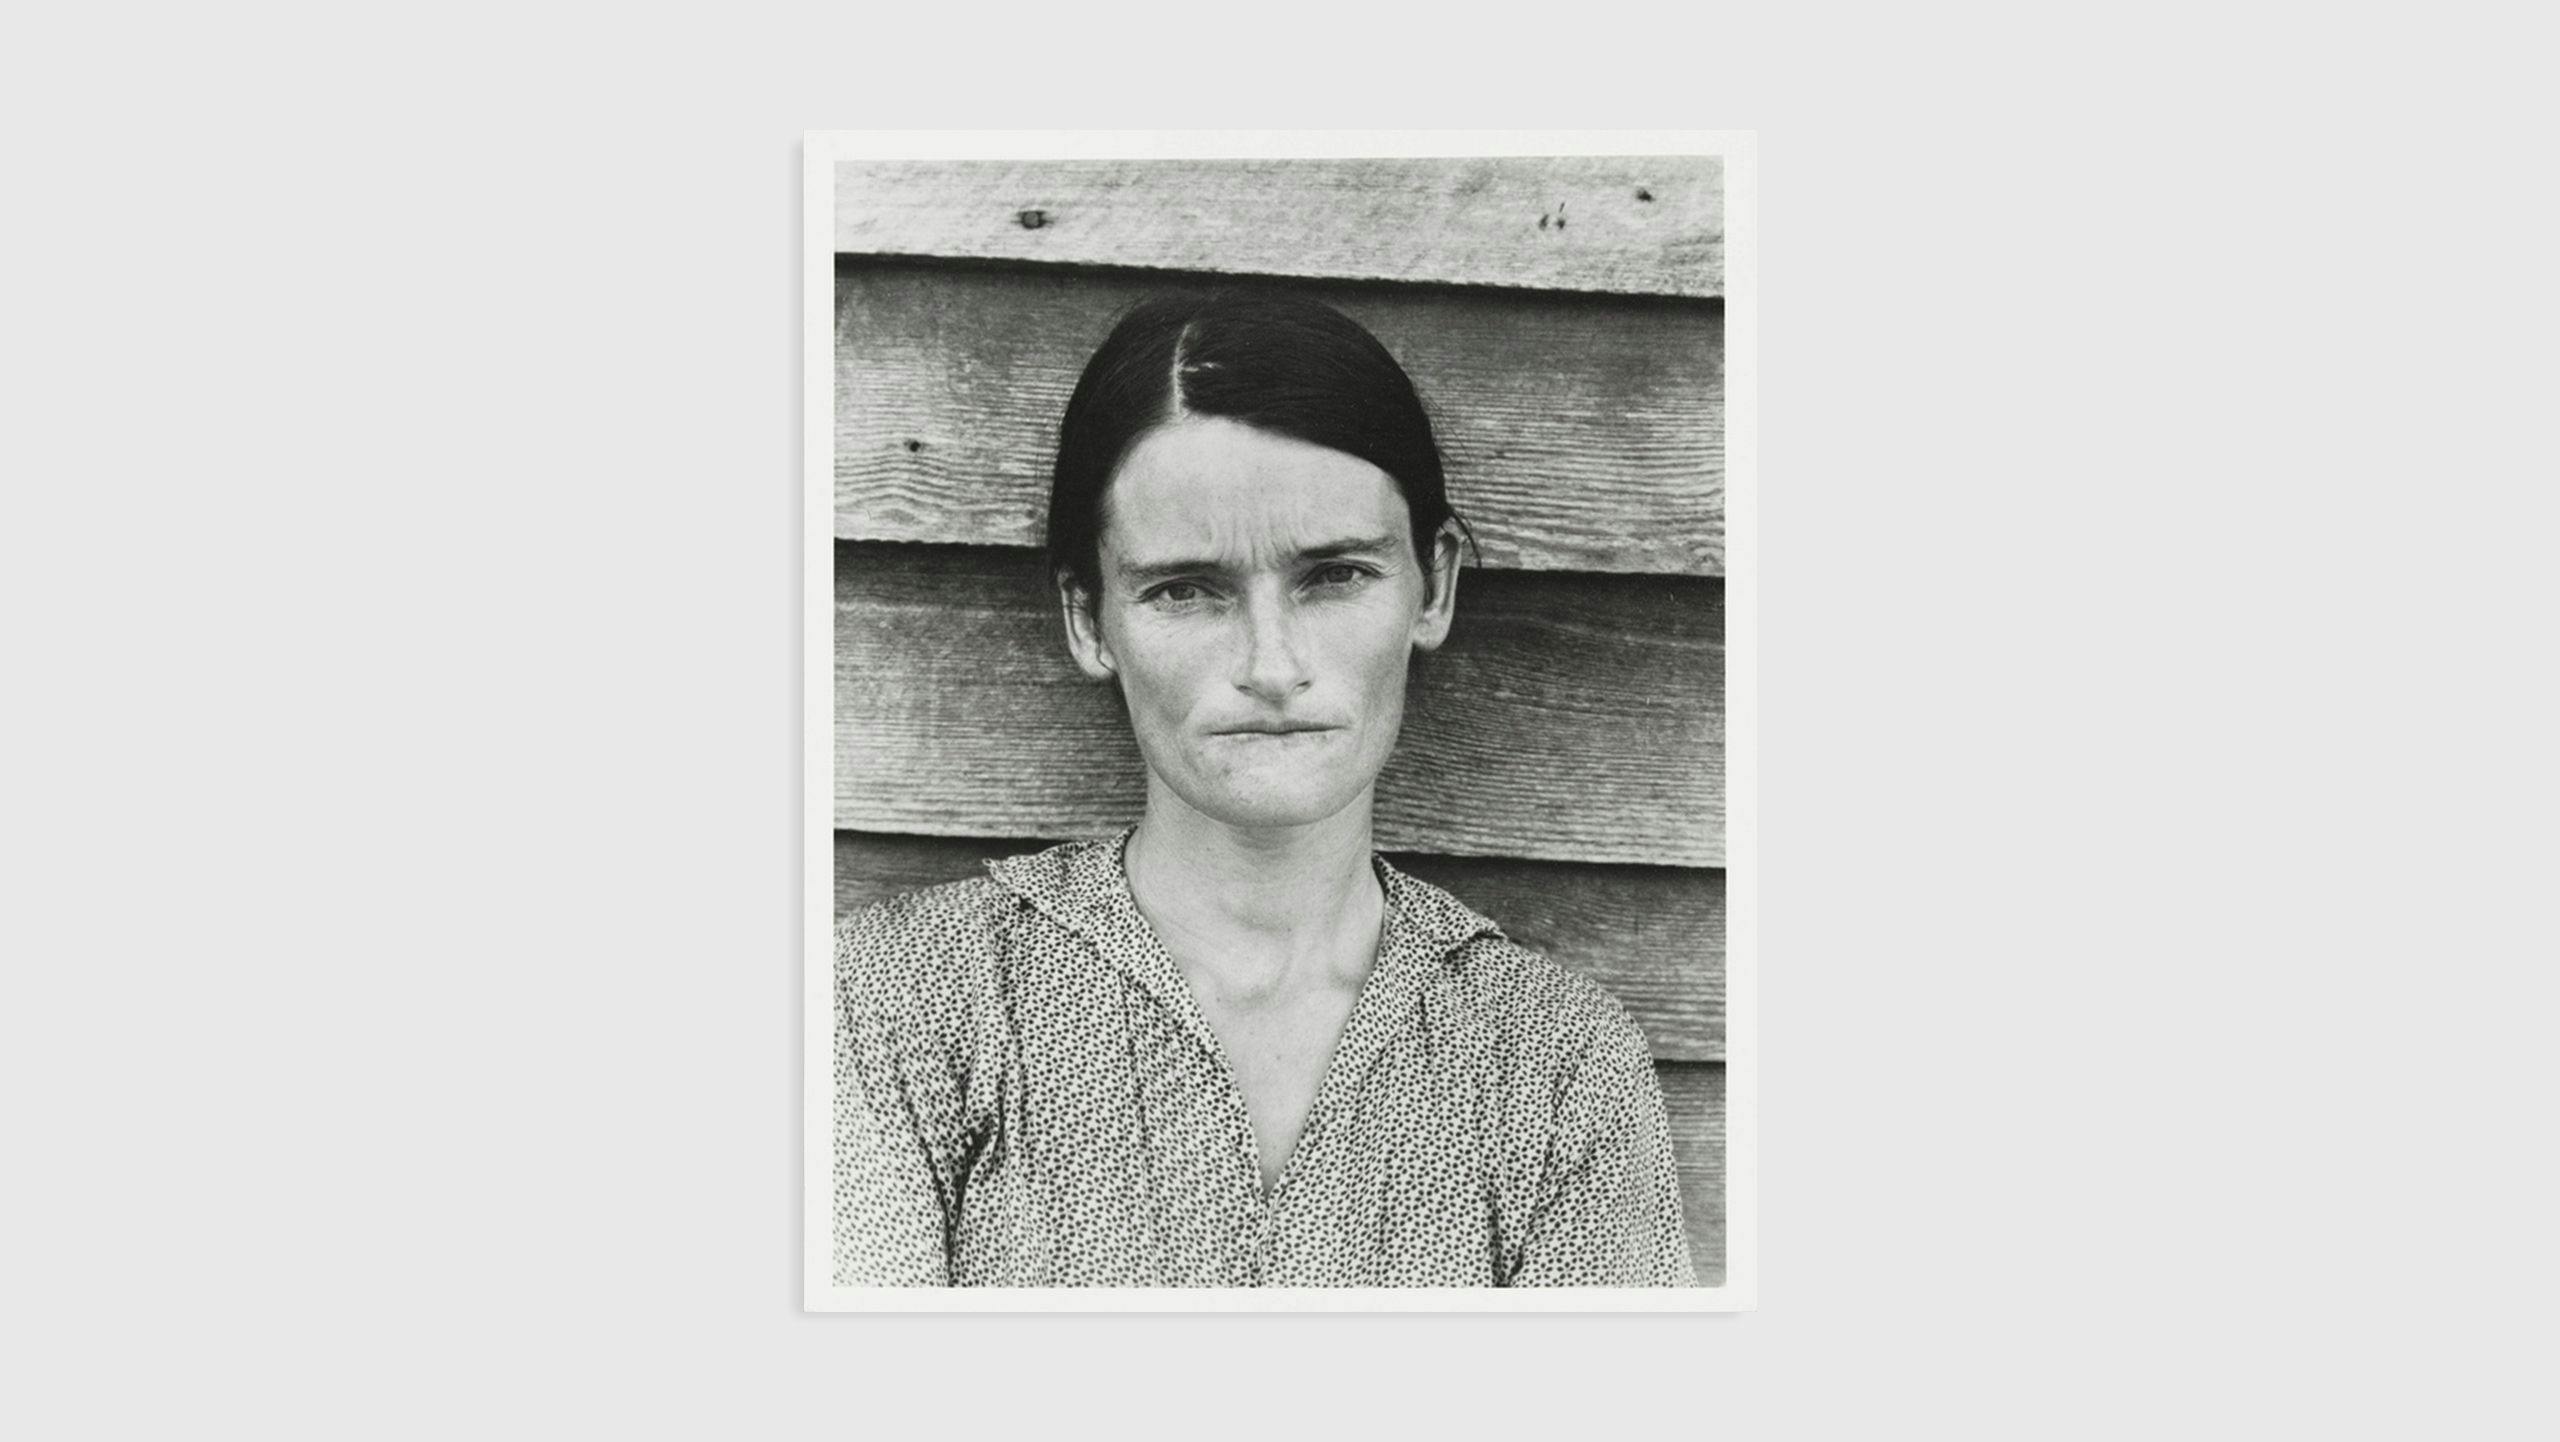 Photograph by Sherrie Levine ,titled After Walker Evans: 4, from the collection of Whitney Museum of American Art in New York, dated 1981.